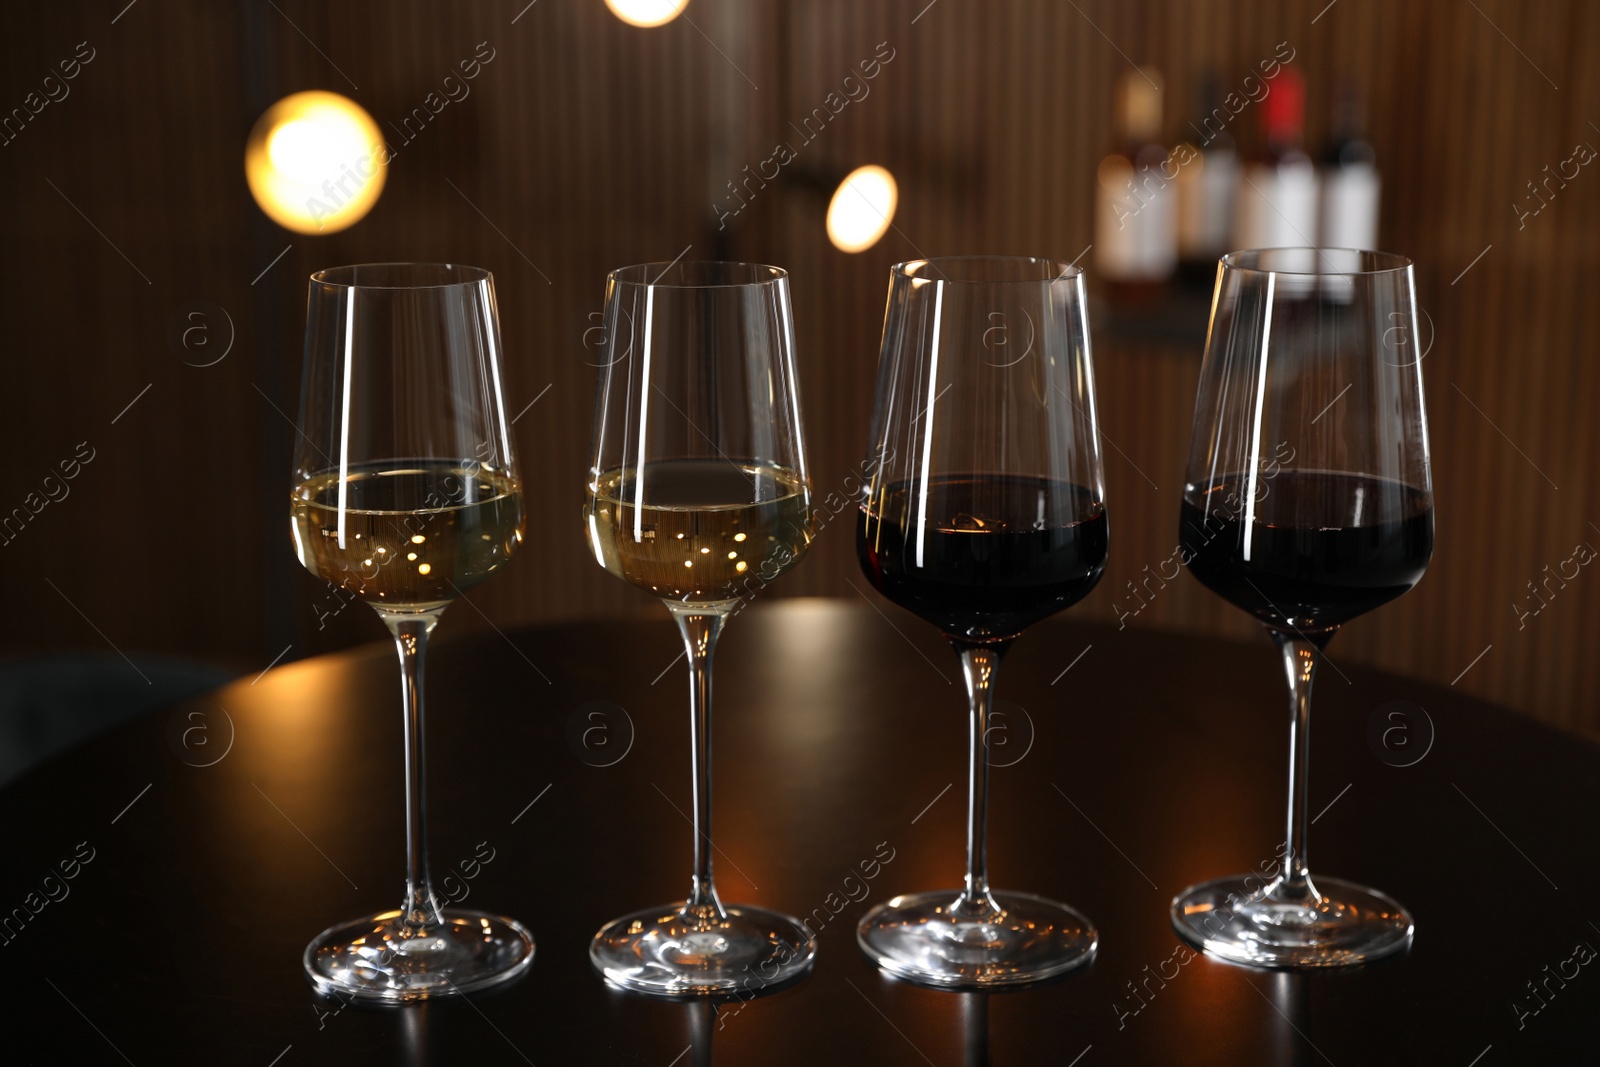 Photo of Glasses of different wines on table against blurred background